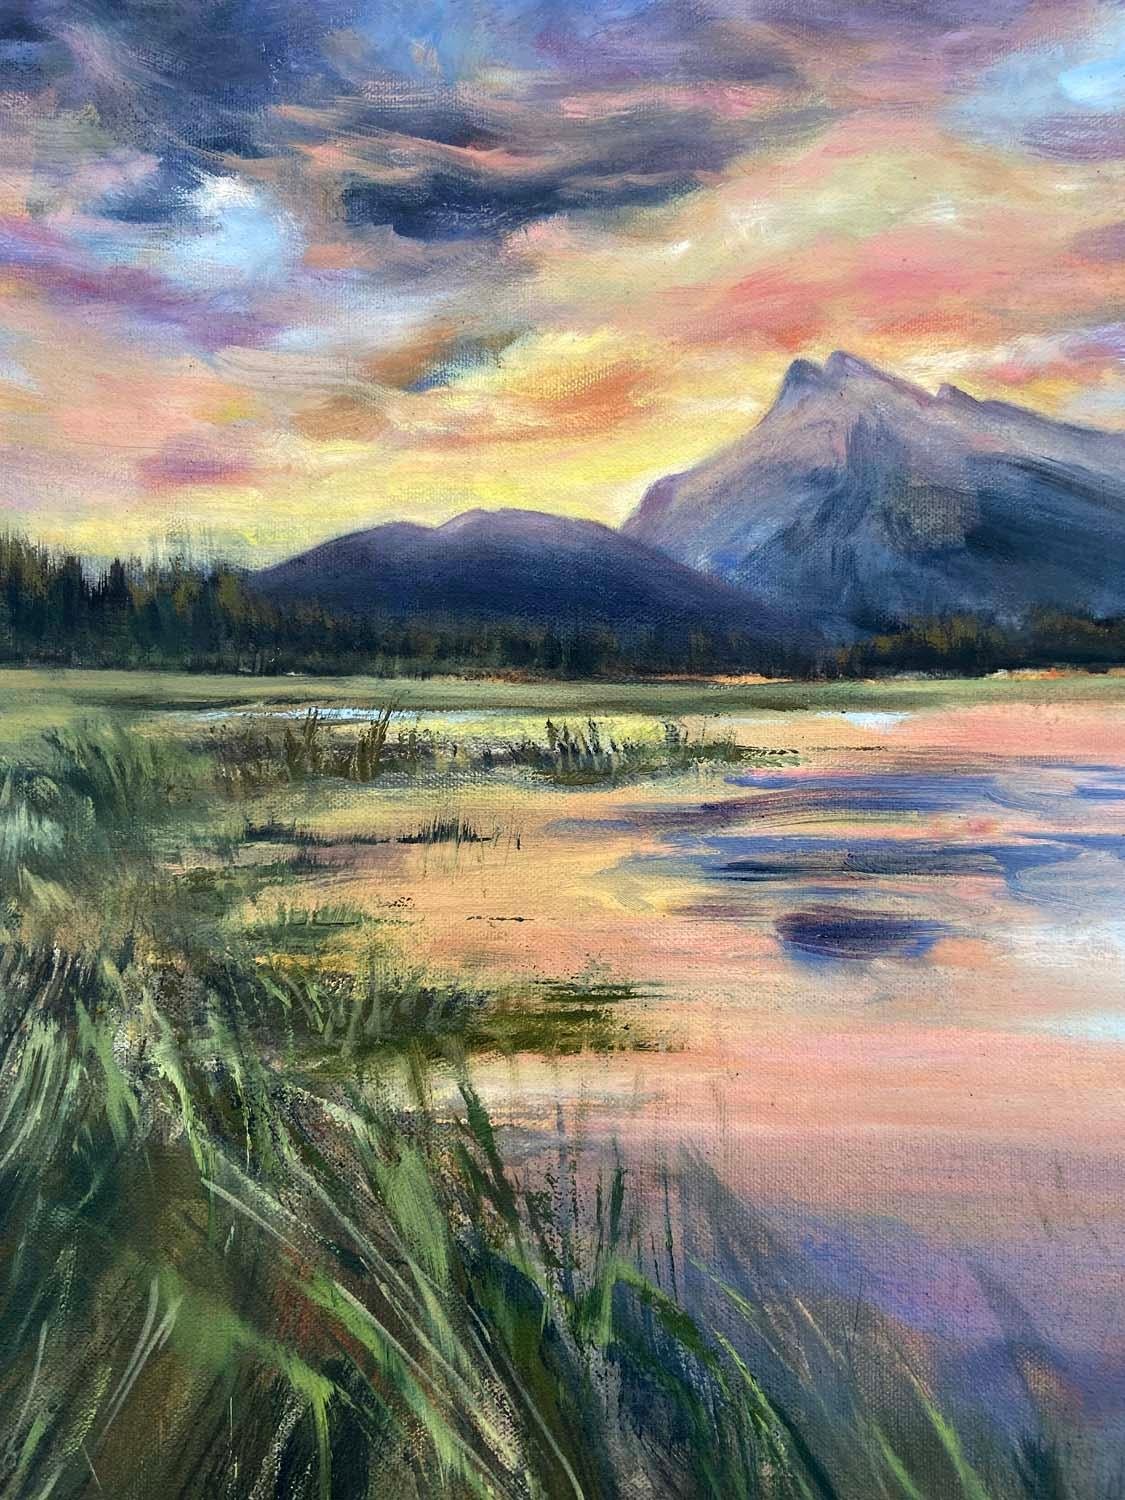 <p>Artist Comments<br>Artist Tiffany Blaise paints an impressionist view of the Rocky Mountains from a distance. She captures a vibrant sunset shining over mountain peaks. The composition projects ethereal movement and radiant color from the